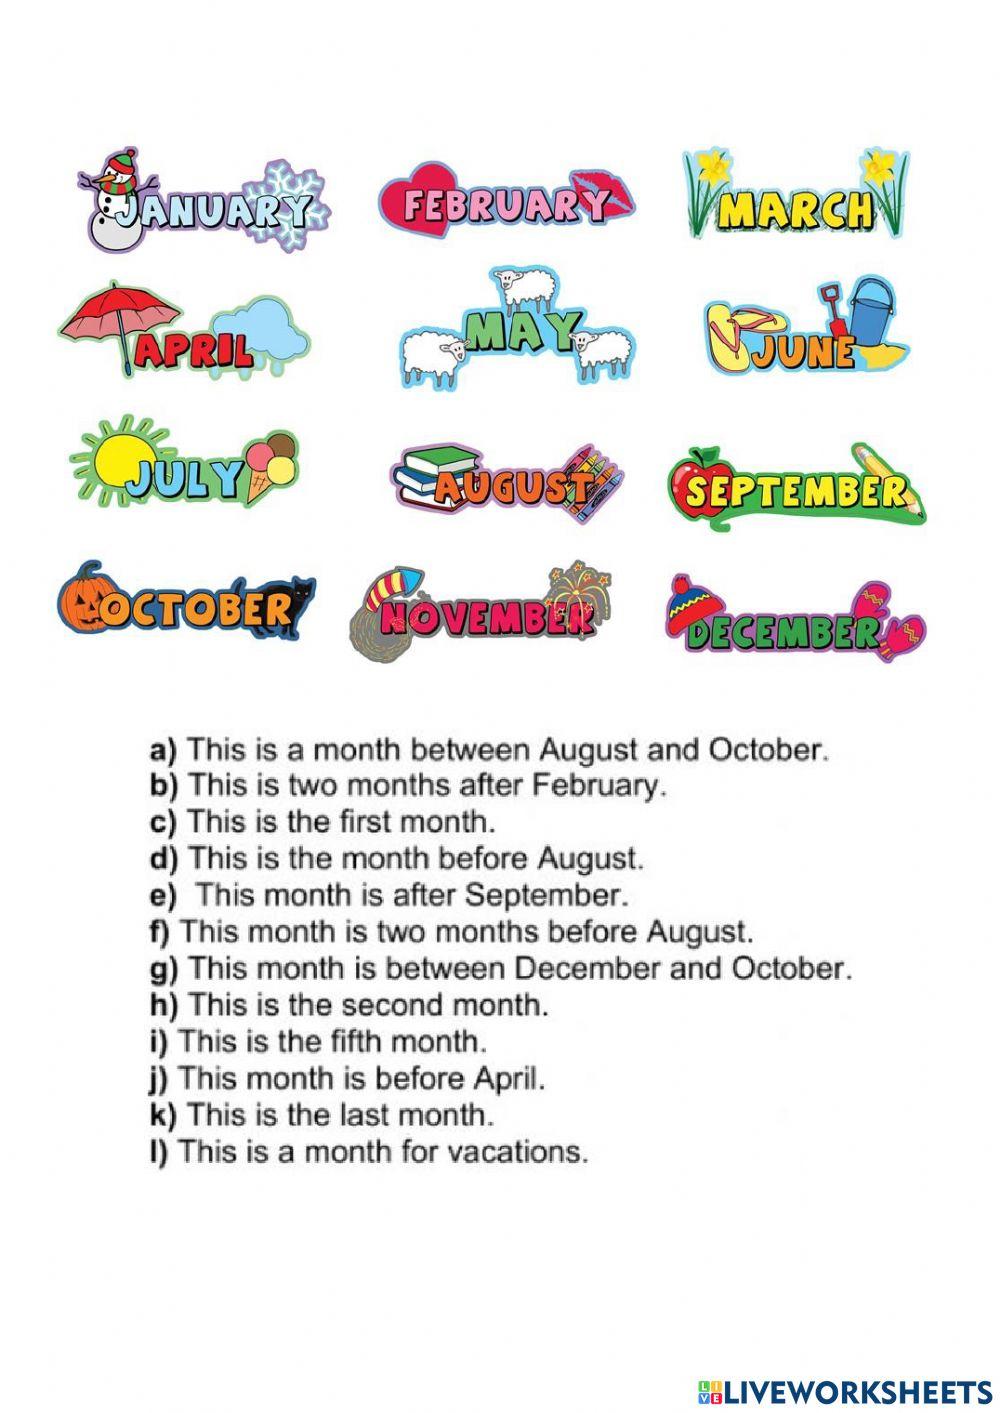 The days of the week and the months of the year